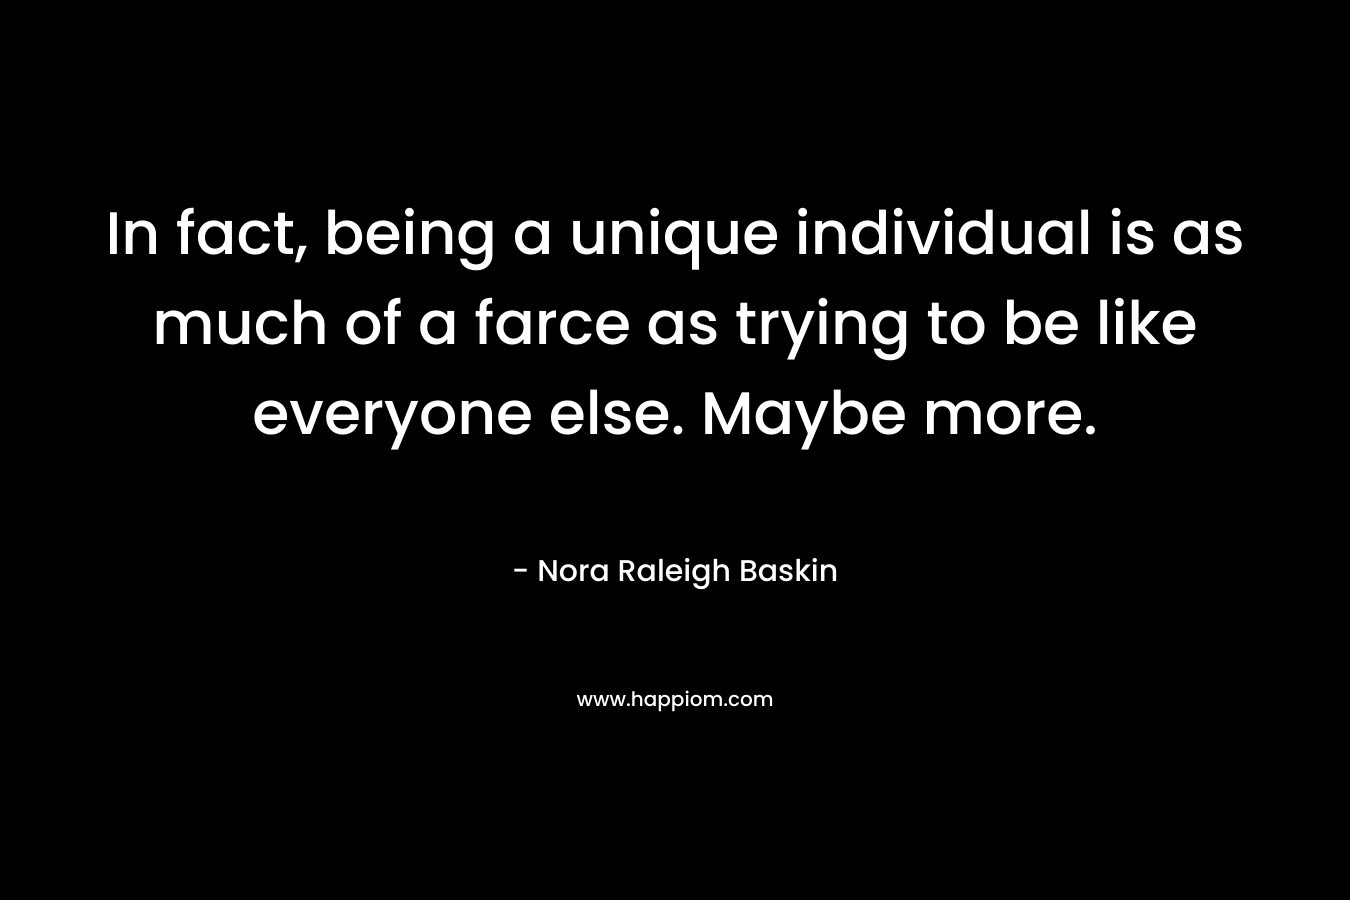 In fact, being a unique individual is as much of a farce as trying to be like everyone else. Maybe more. – Nora Raleigh Baskin